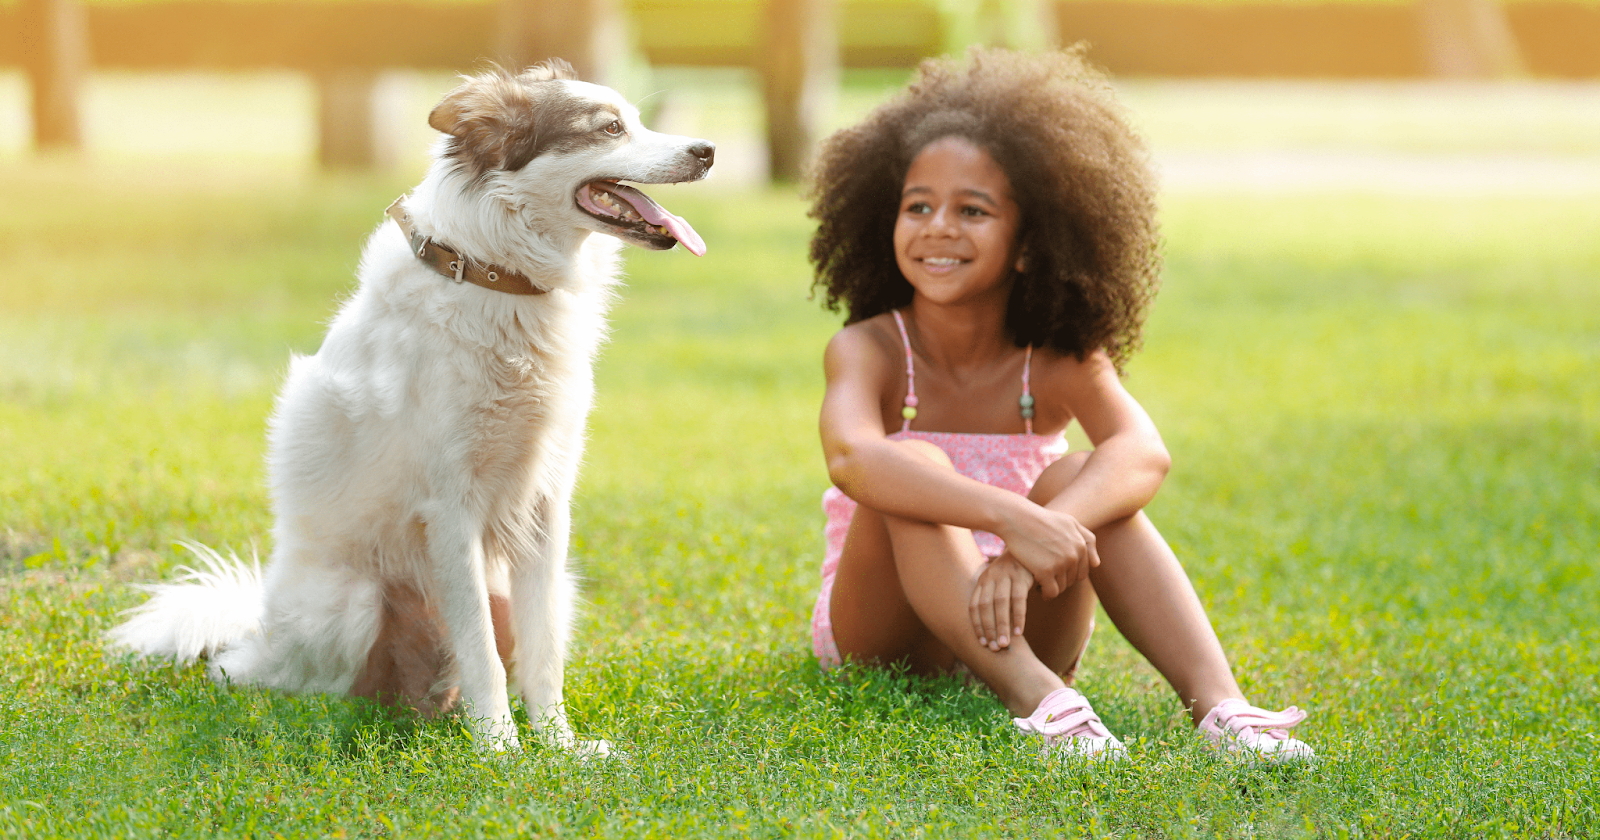 young girl sat in grass with white dog